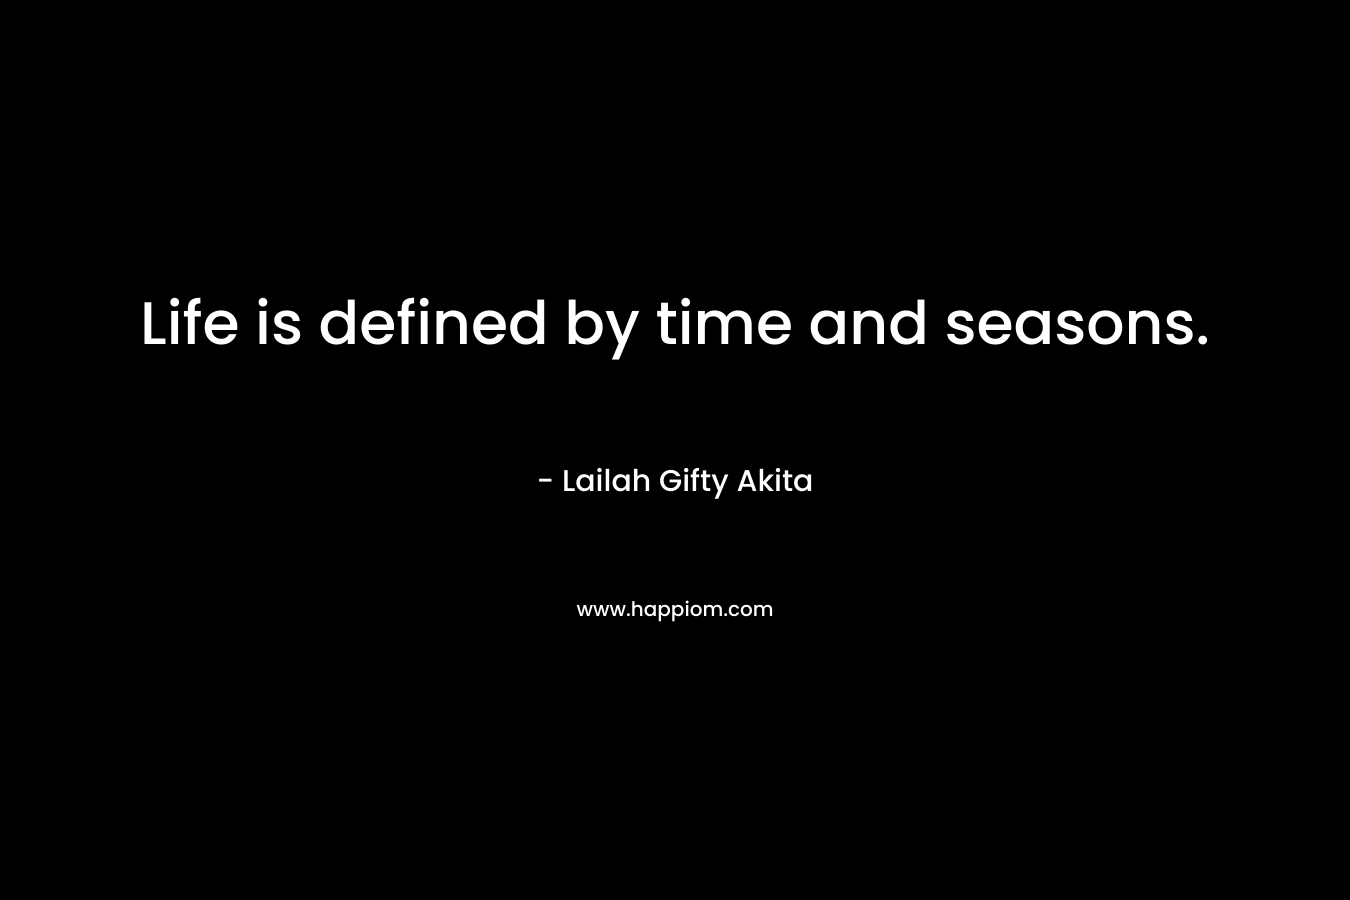 Life is defined by time and seasons.